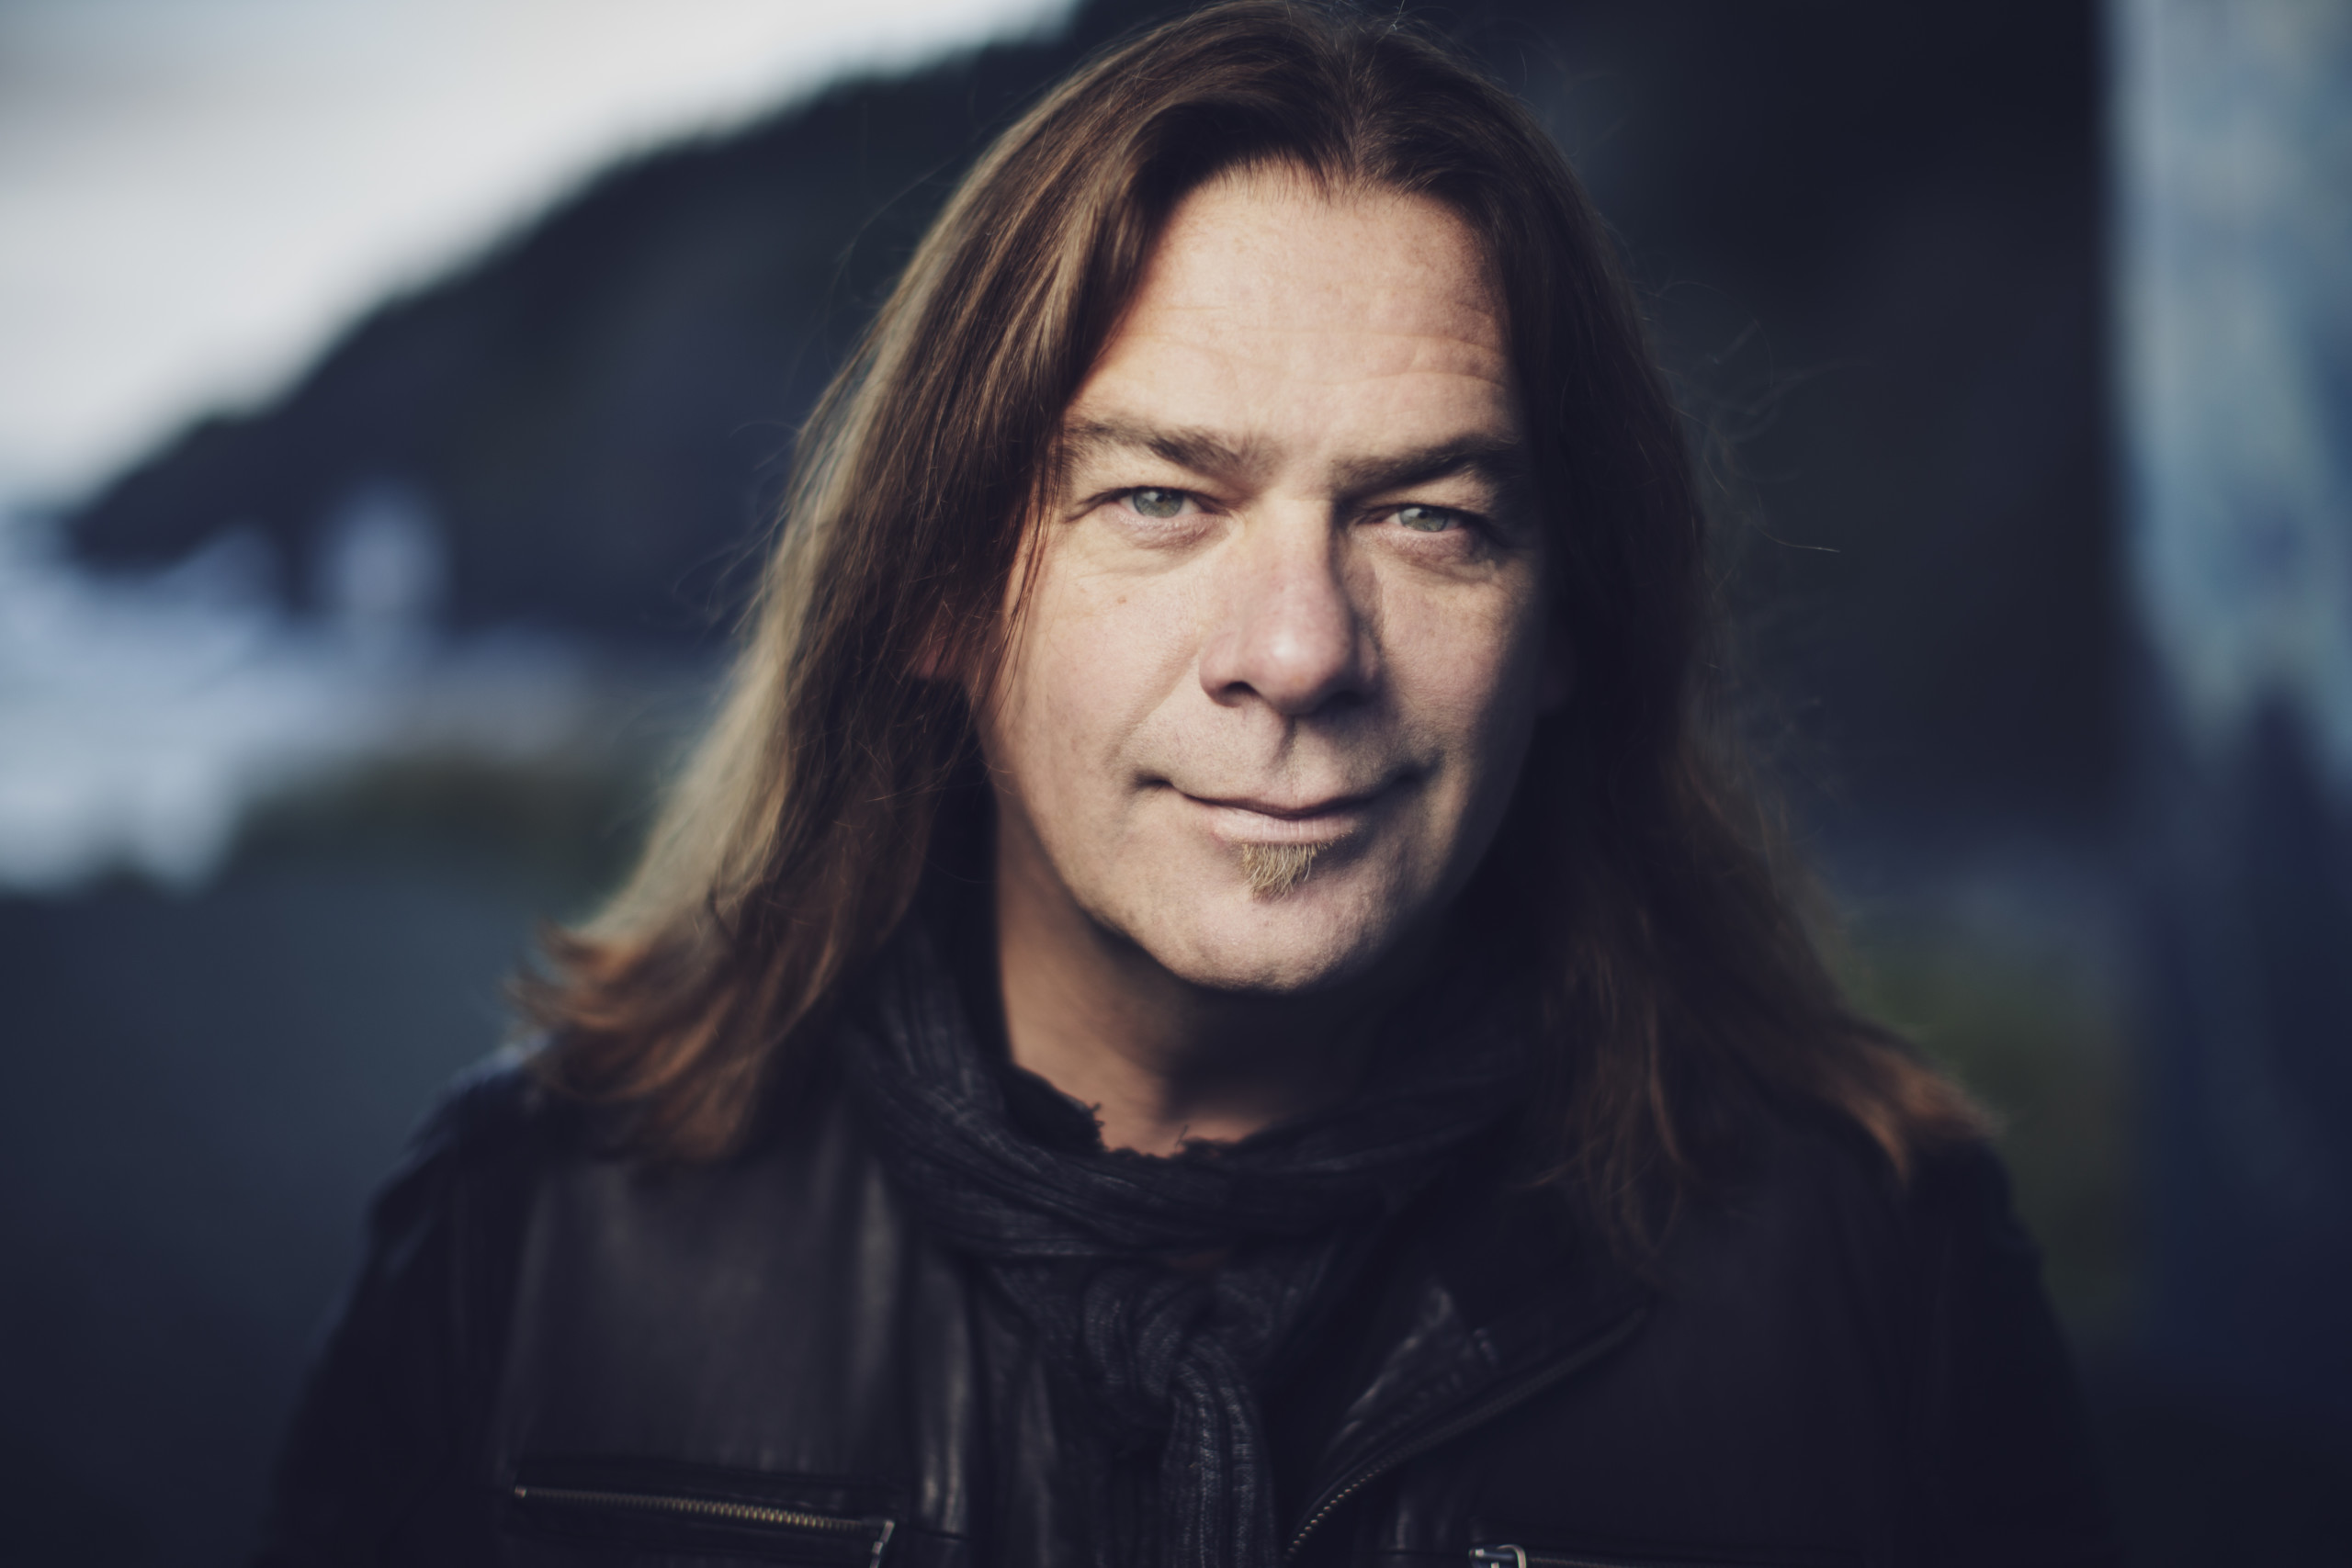 Alan Doyle show supporting music programs at the Grove